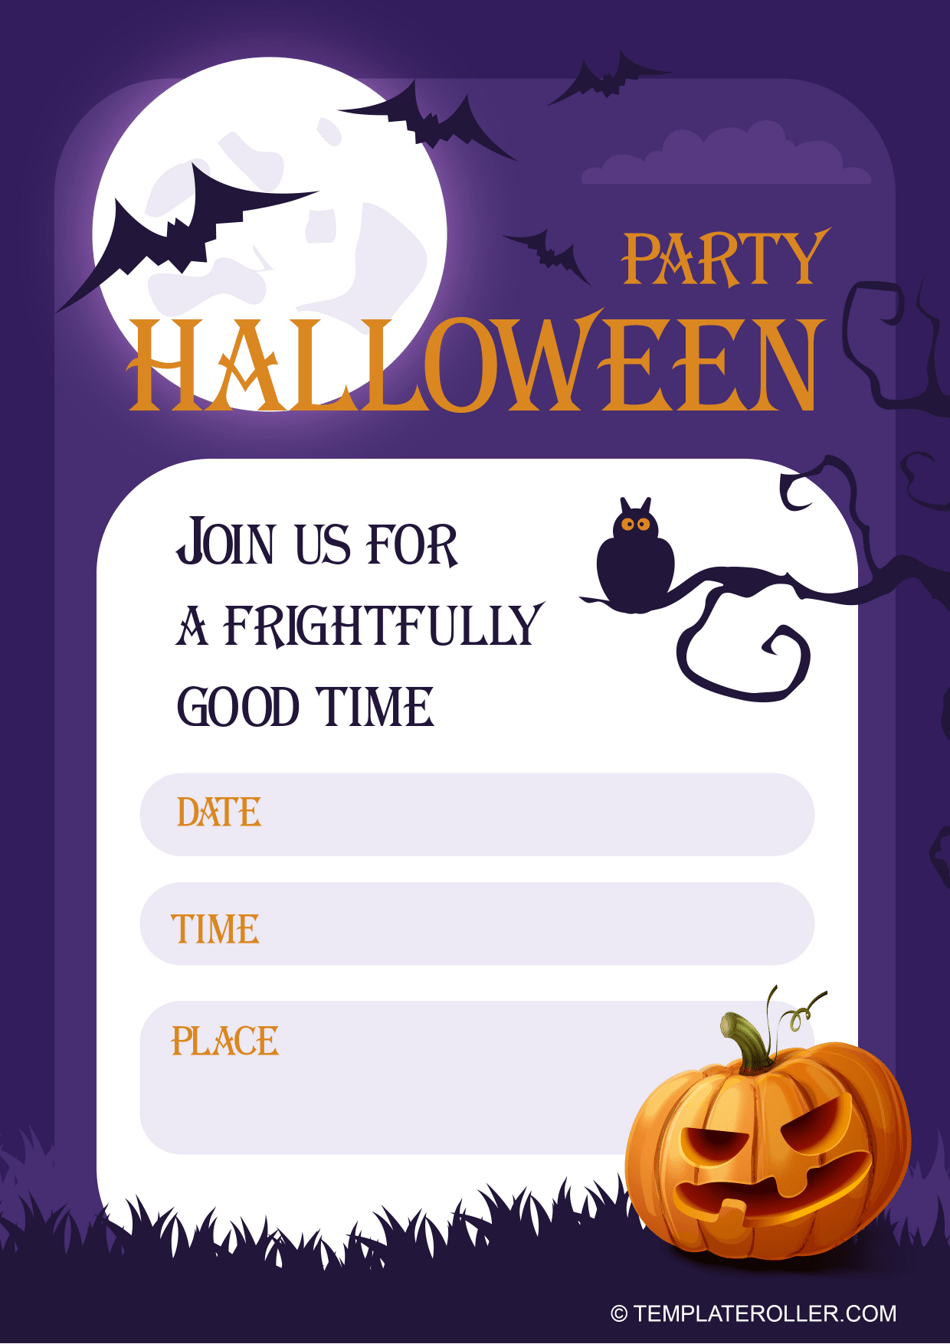 Halloween Party Invitation Template - Violet Download Printable PDF ...